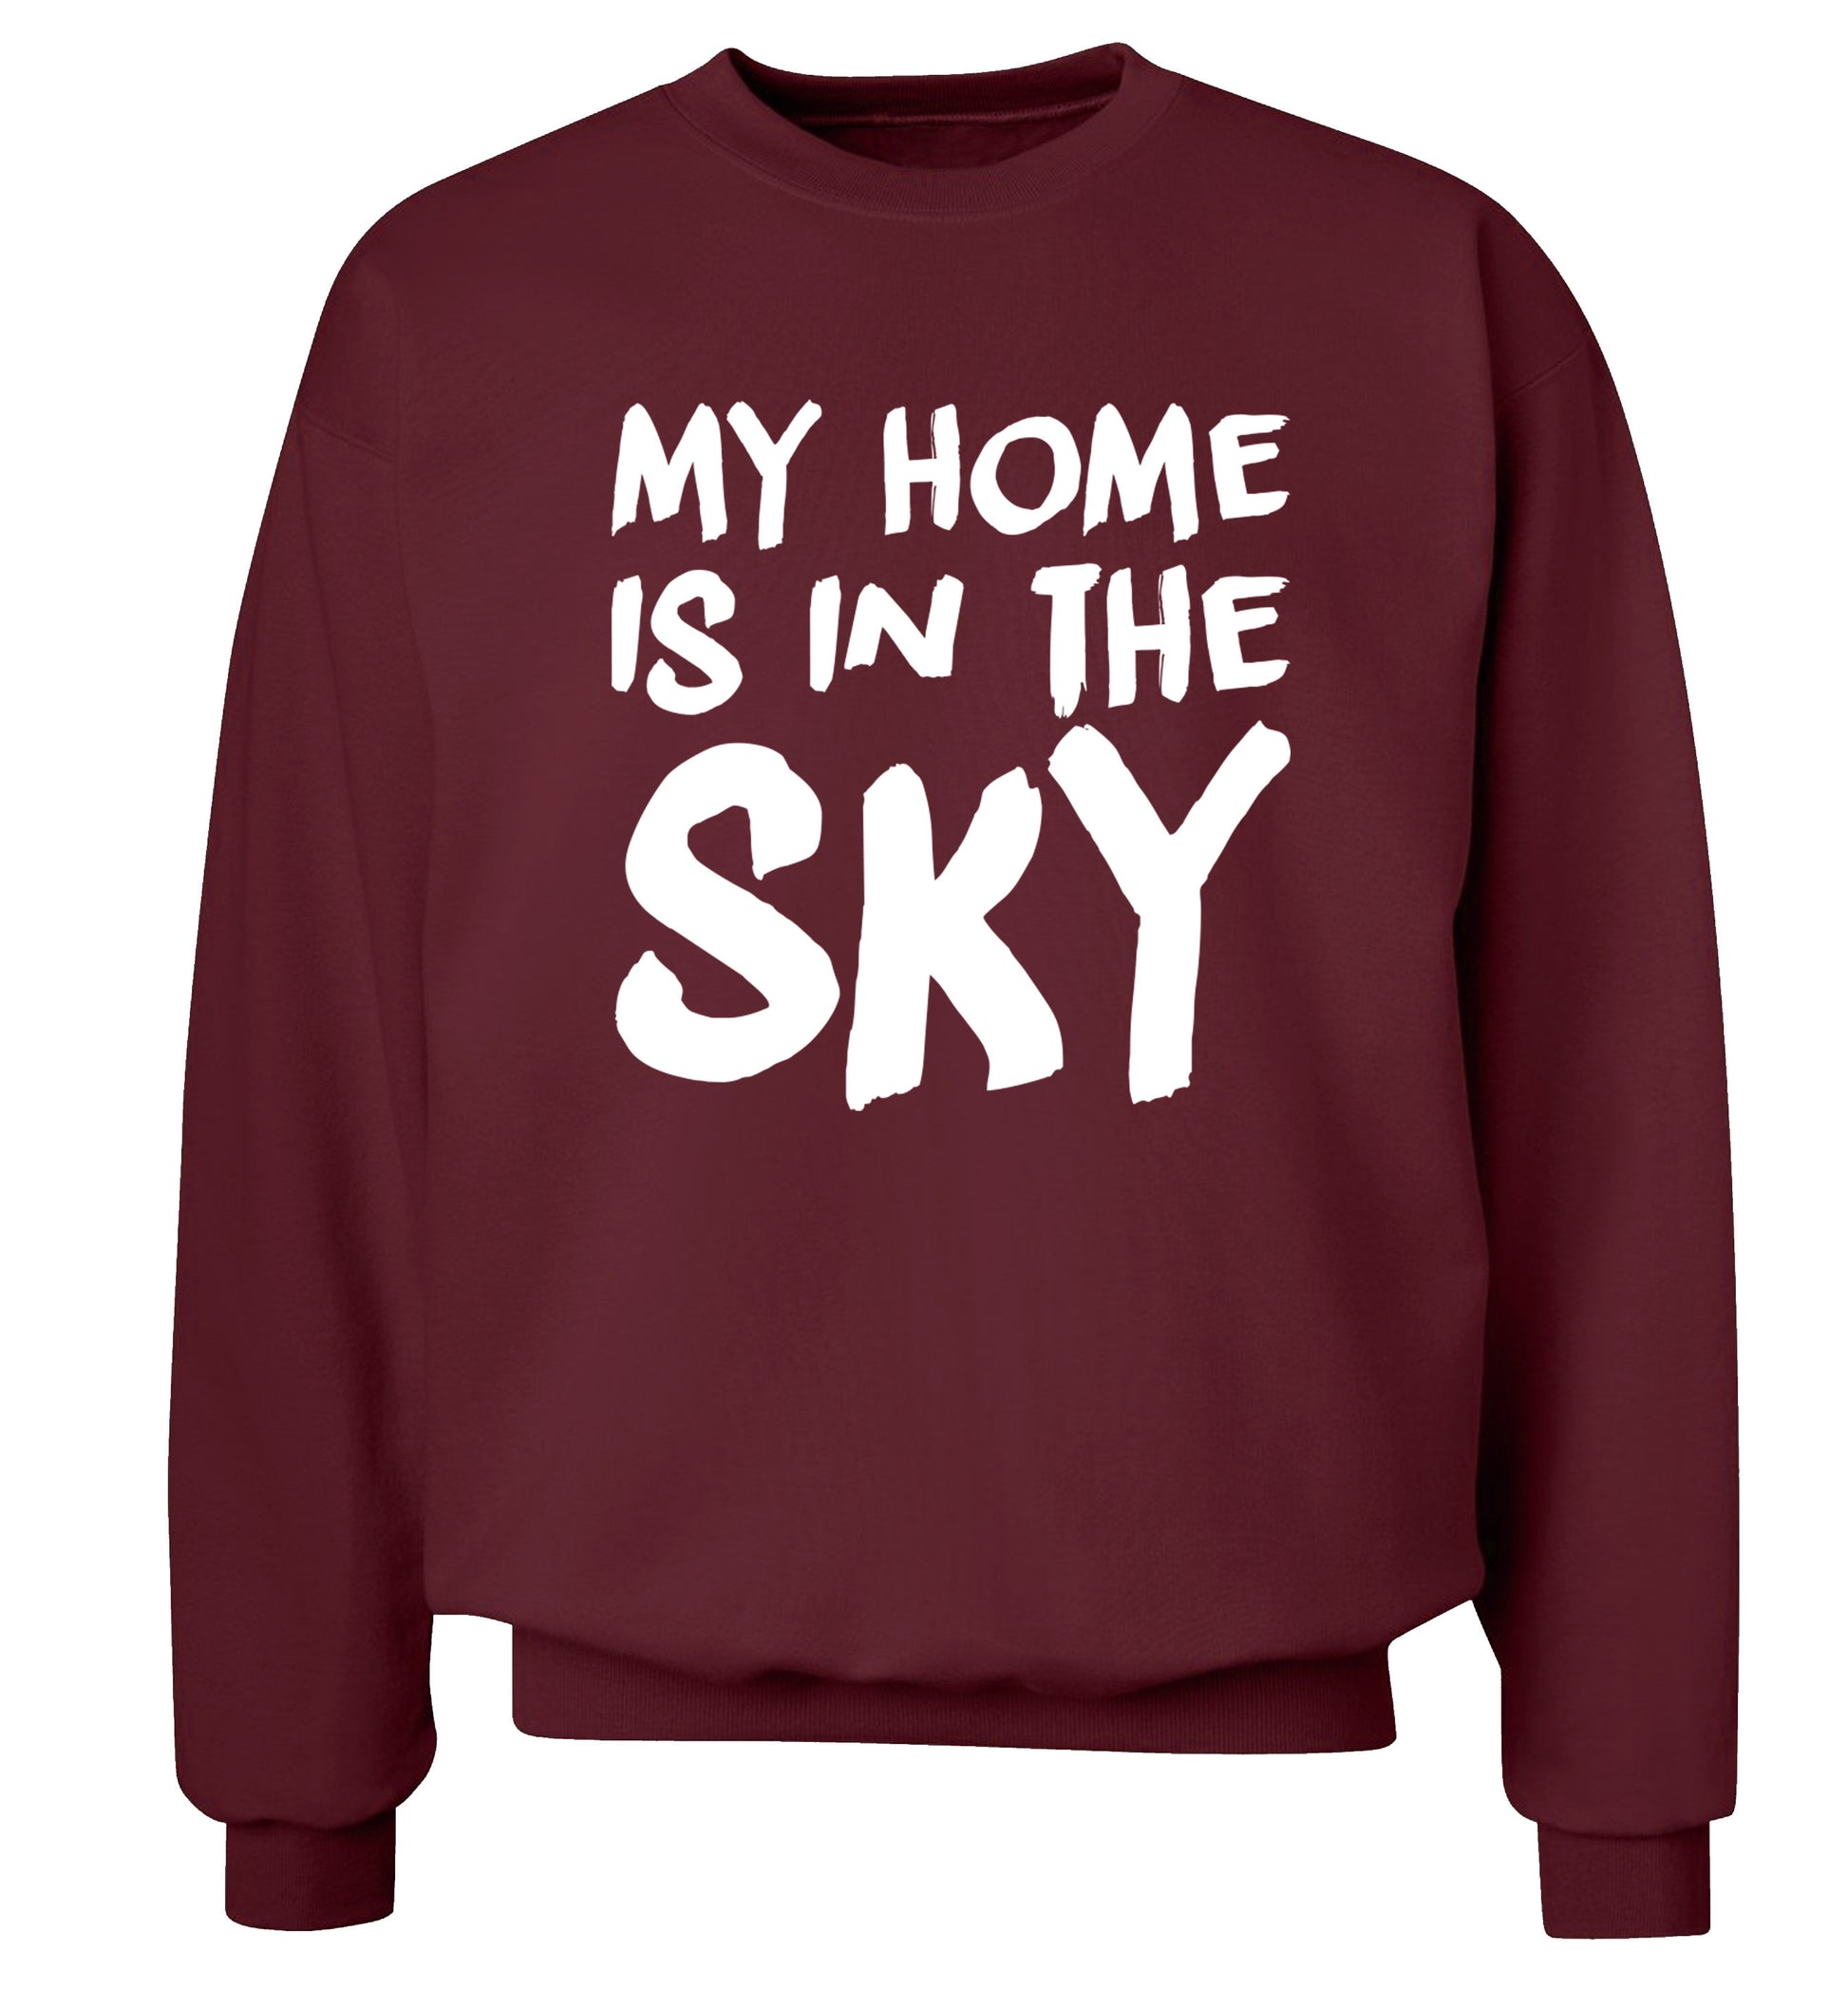 My home is in the sky Adult's unisex maroon Sweater 2XL